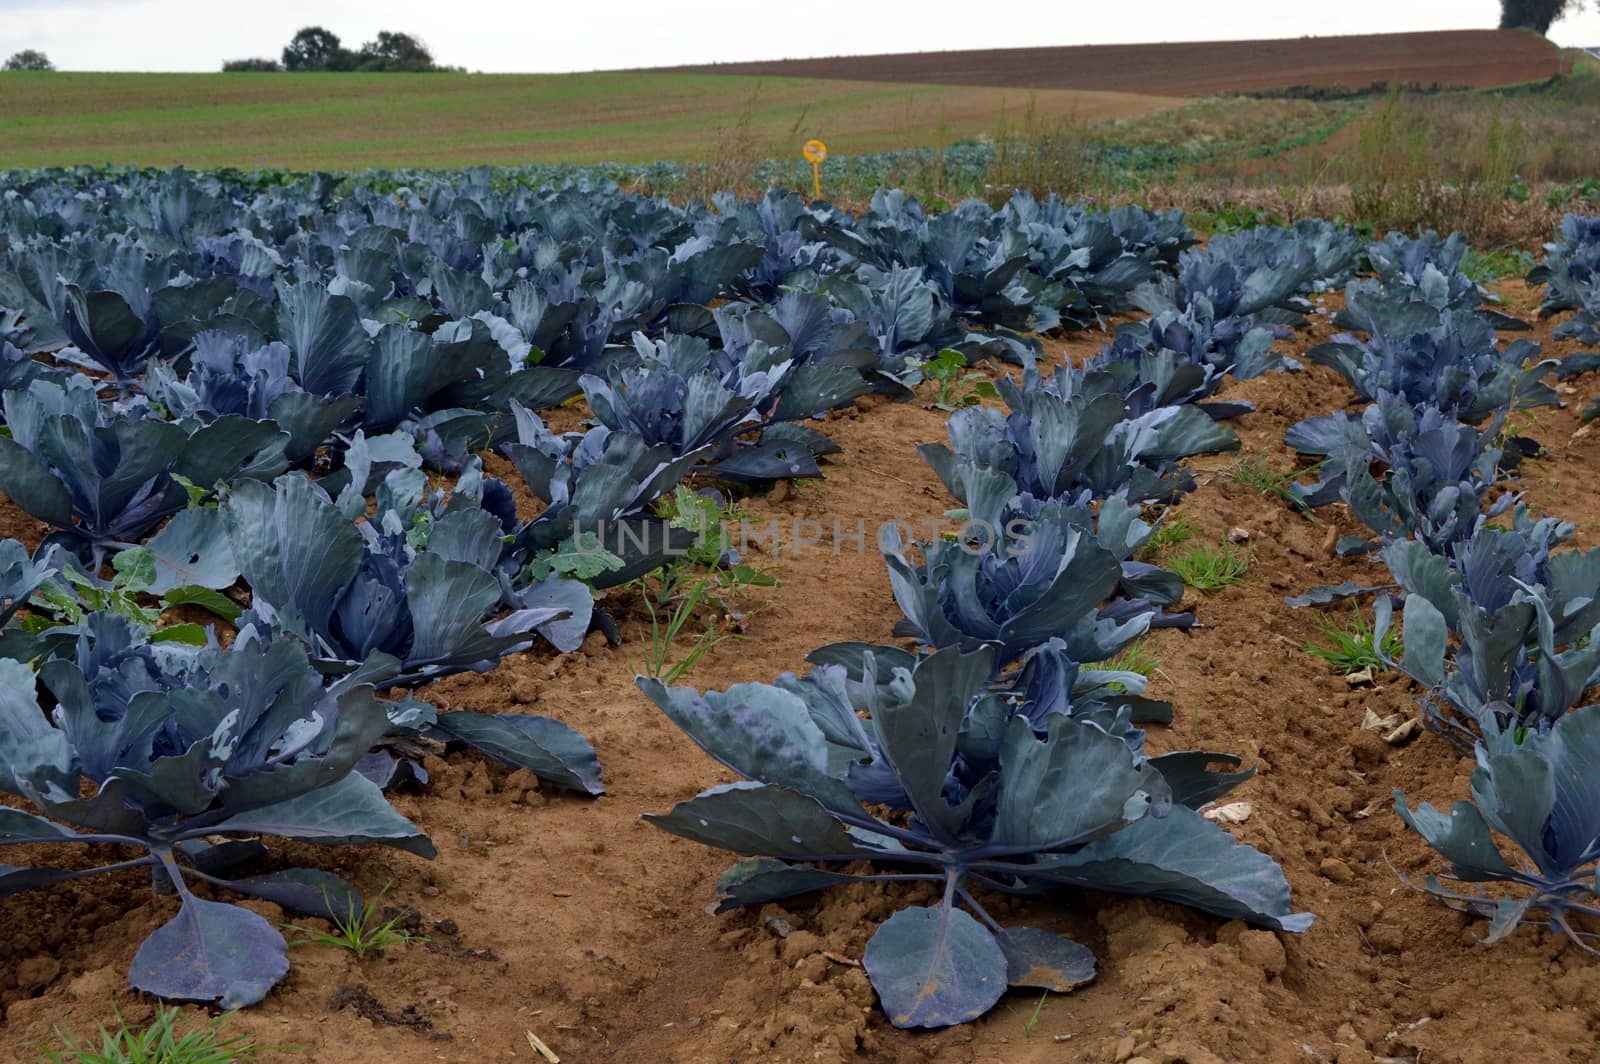 Several lines of cabbages red to cultivate in a field of Belgium.